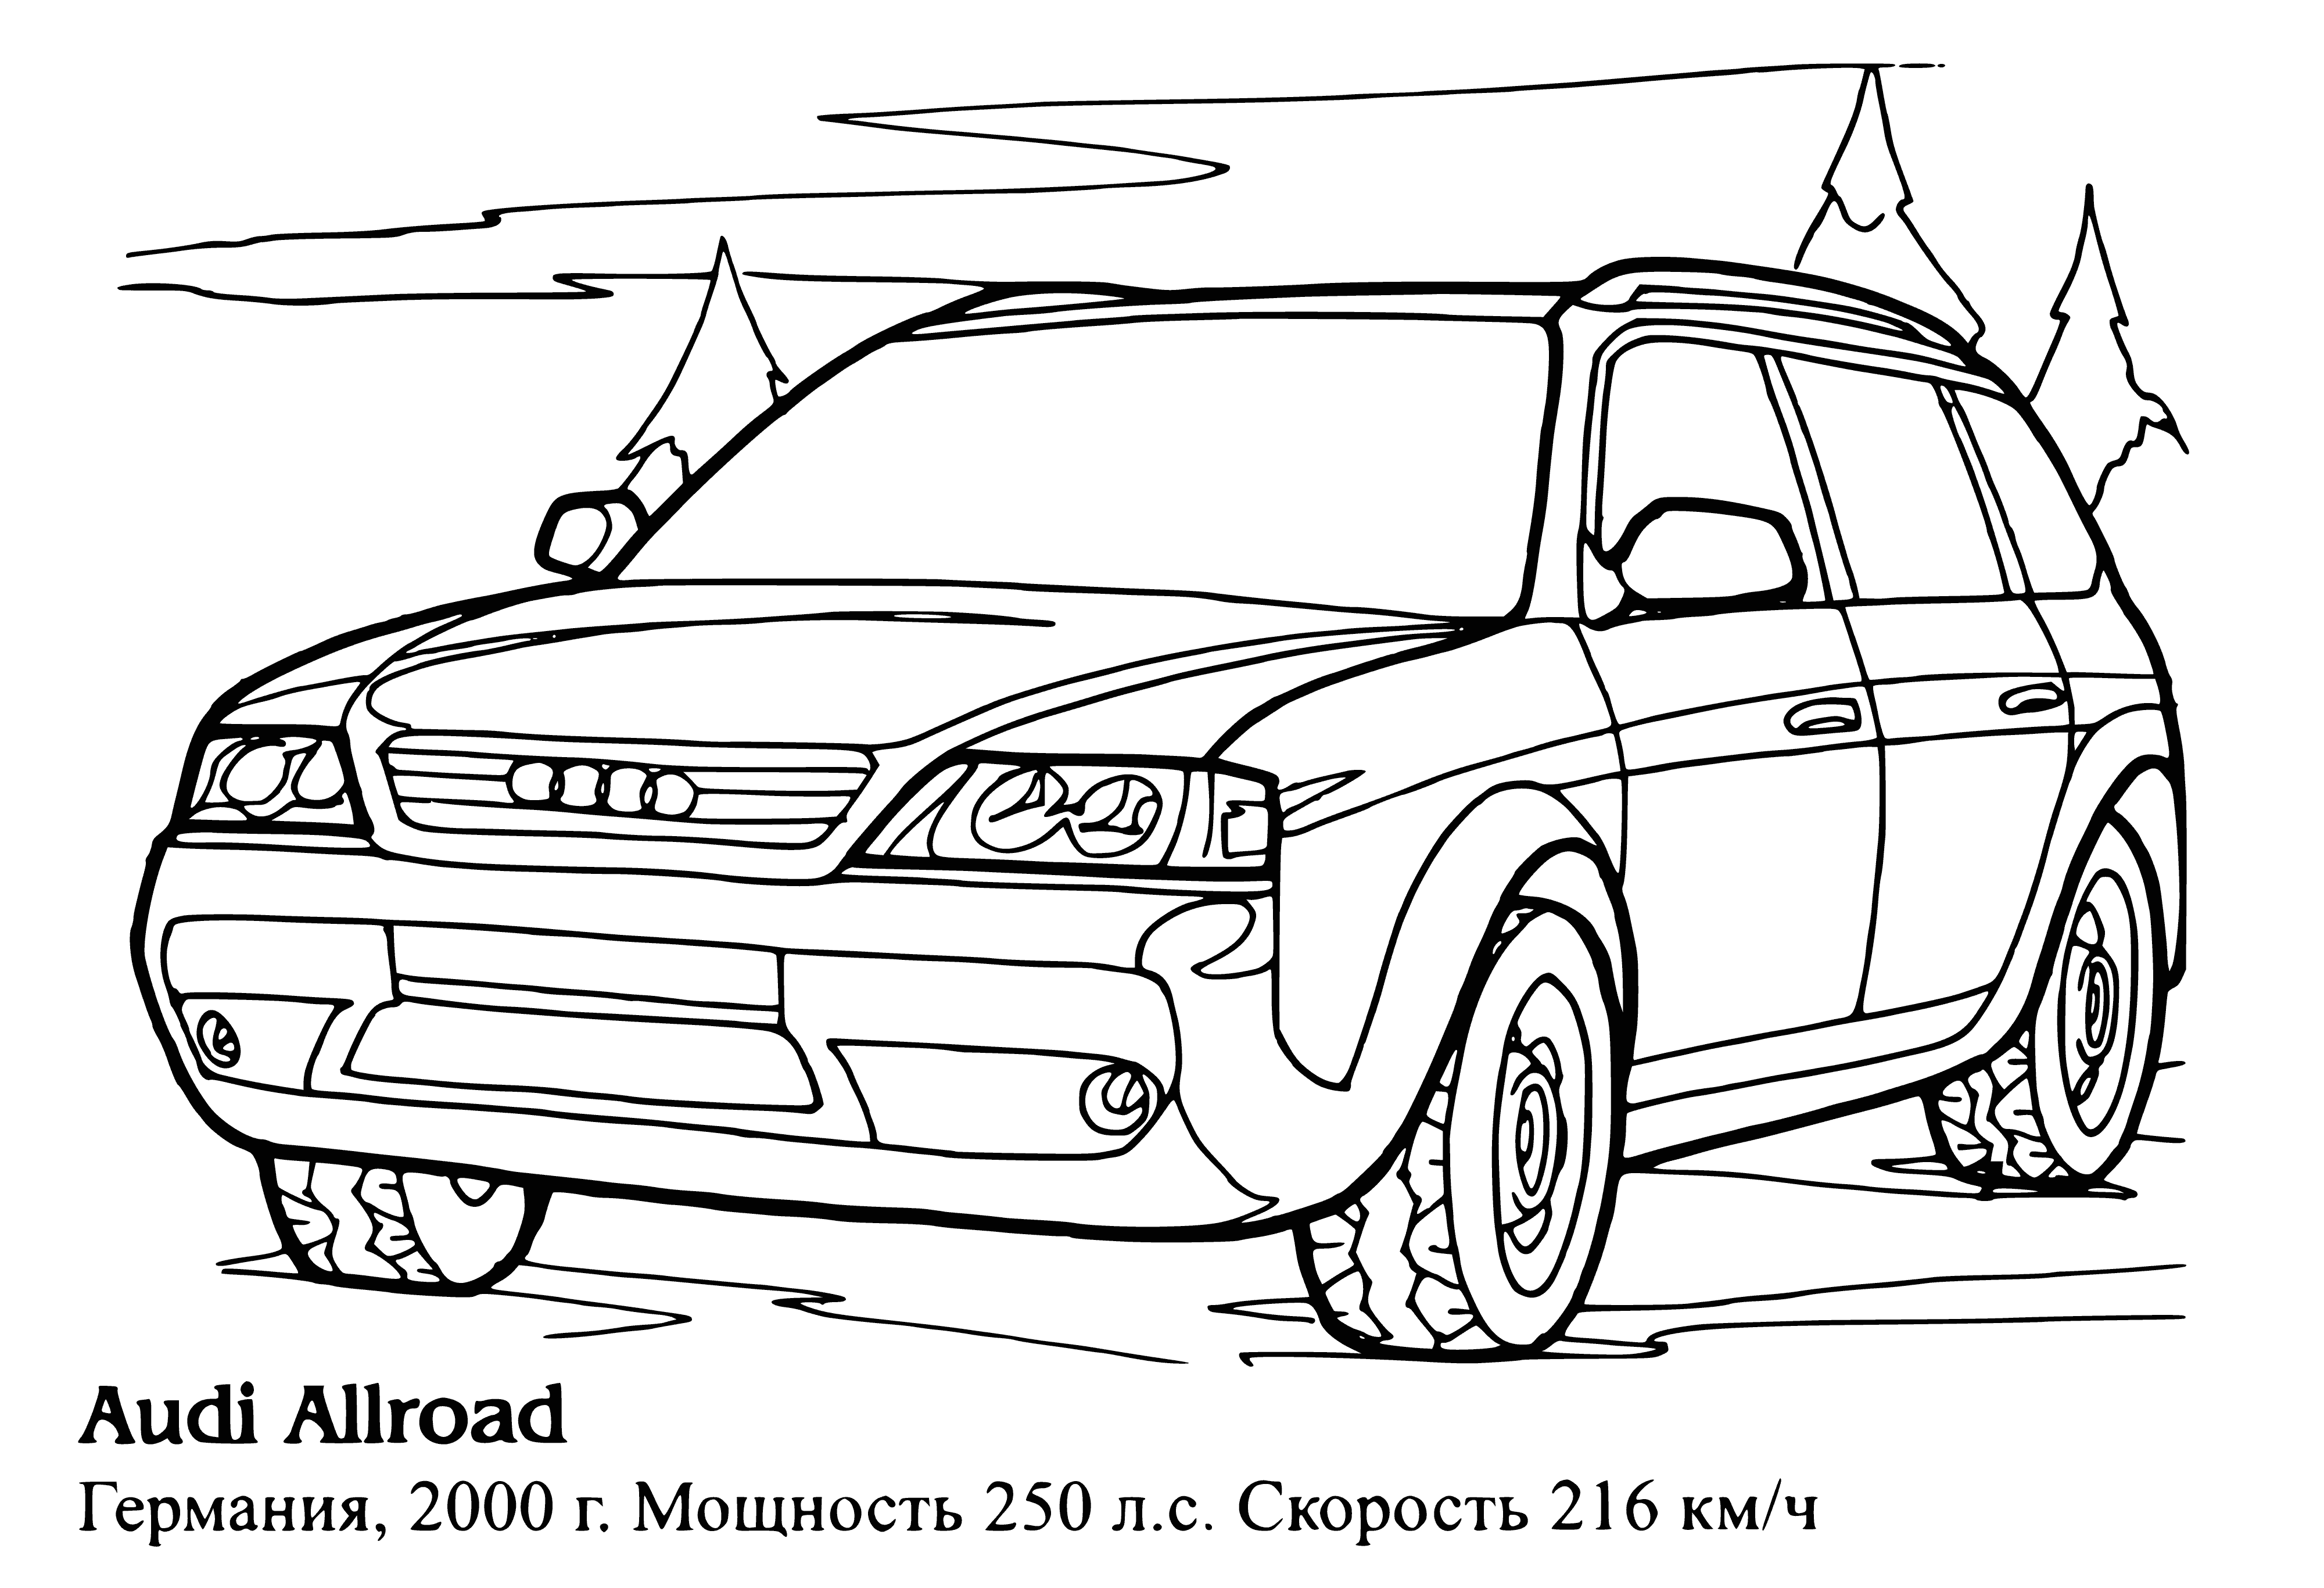 Audi Allroad coloring page